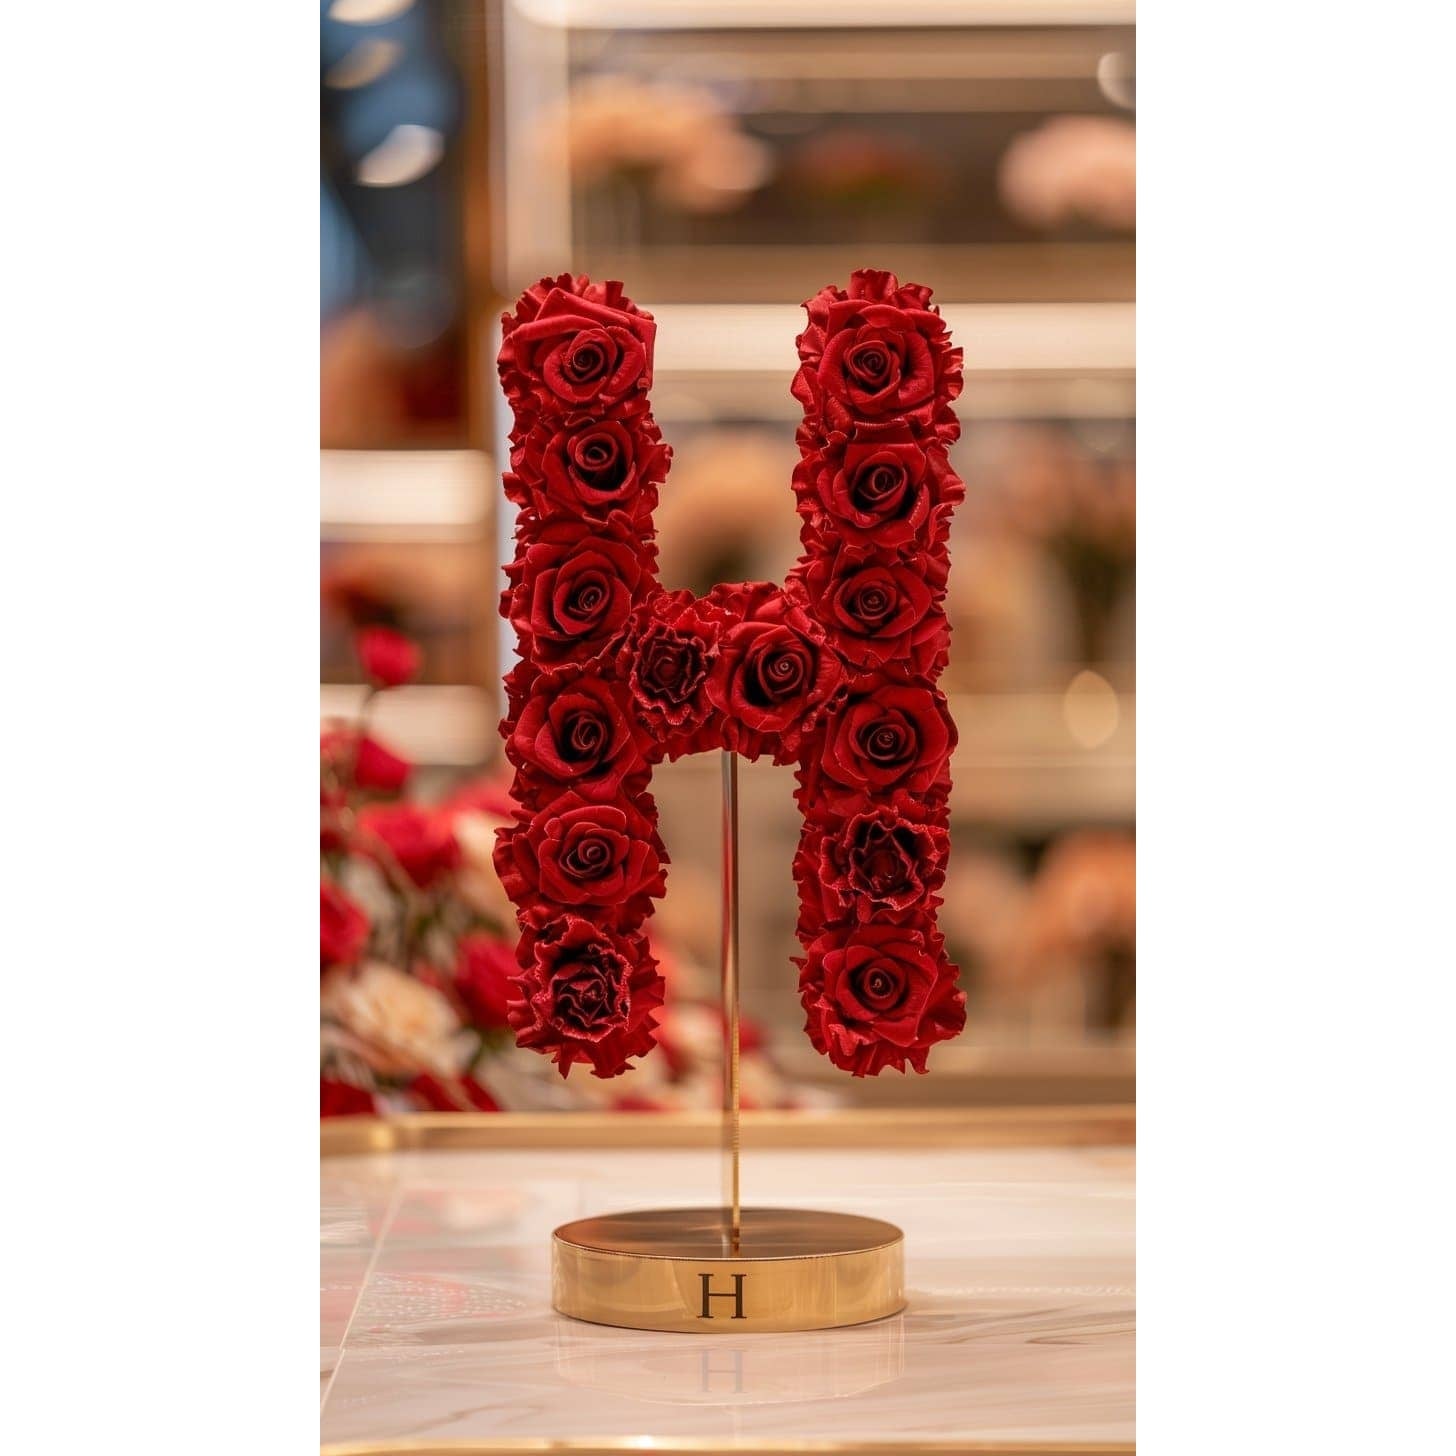 Standing Red Rose Letter H Lamp - Imaginary Worlds